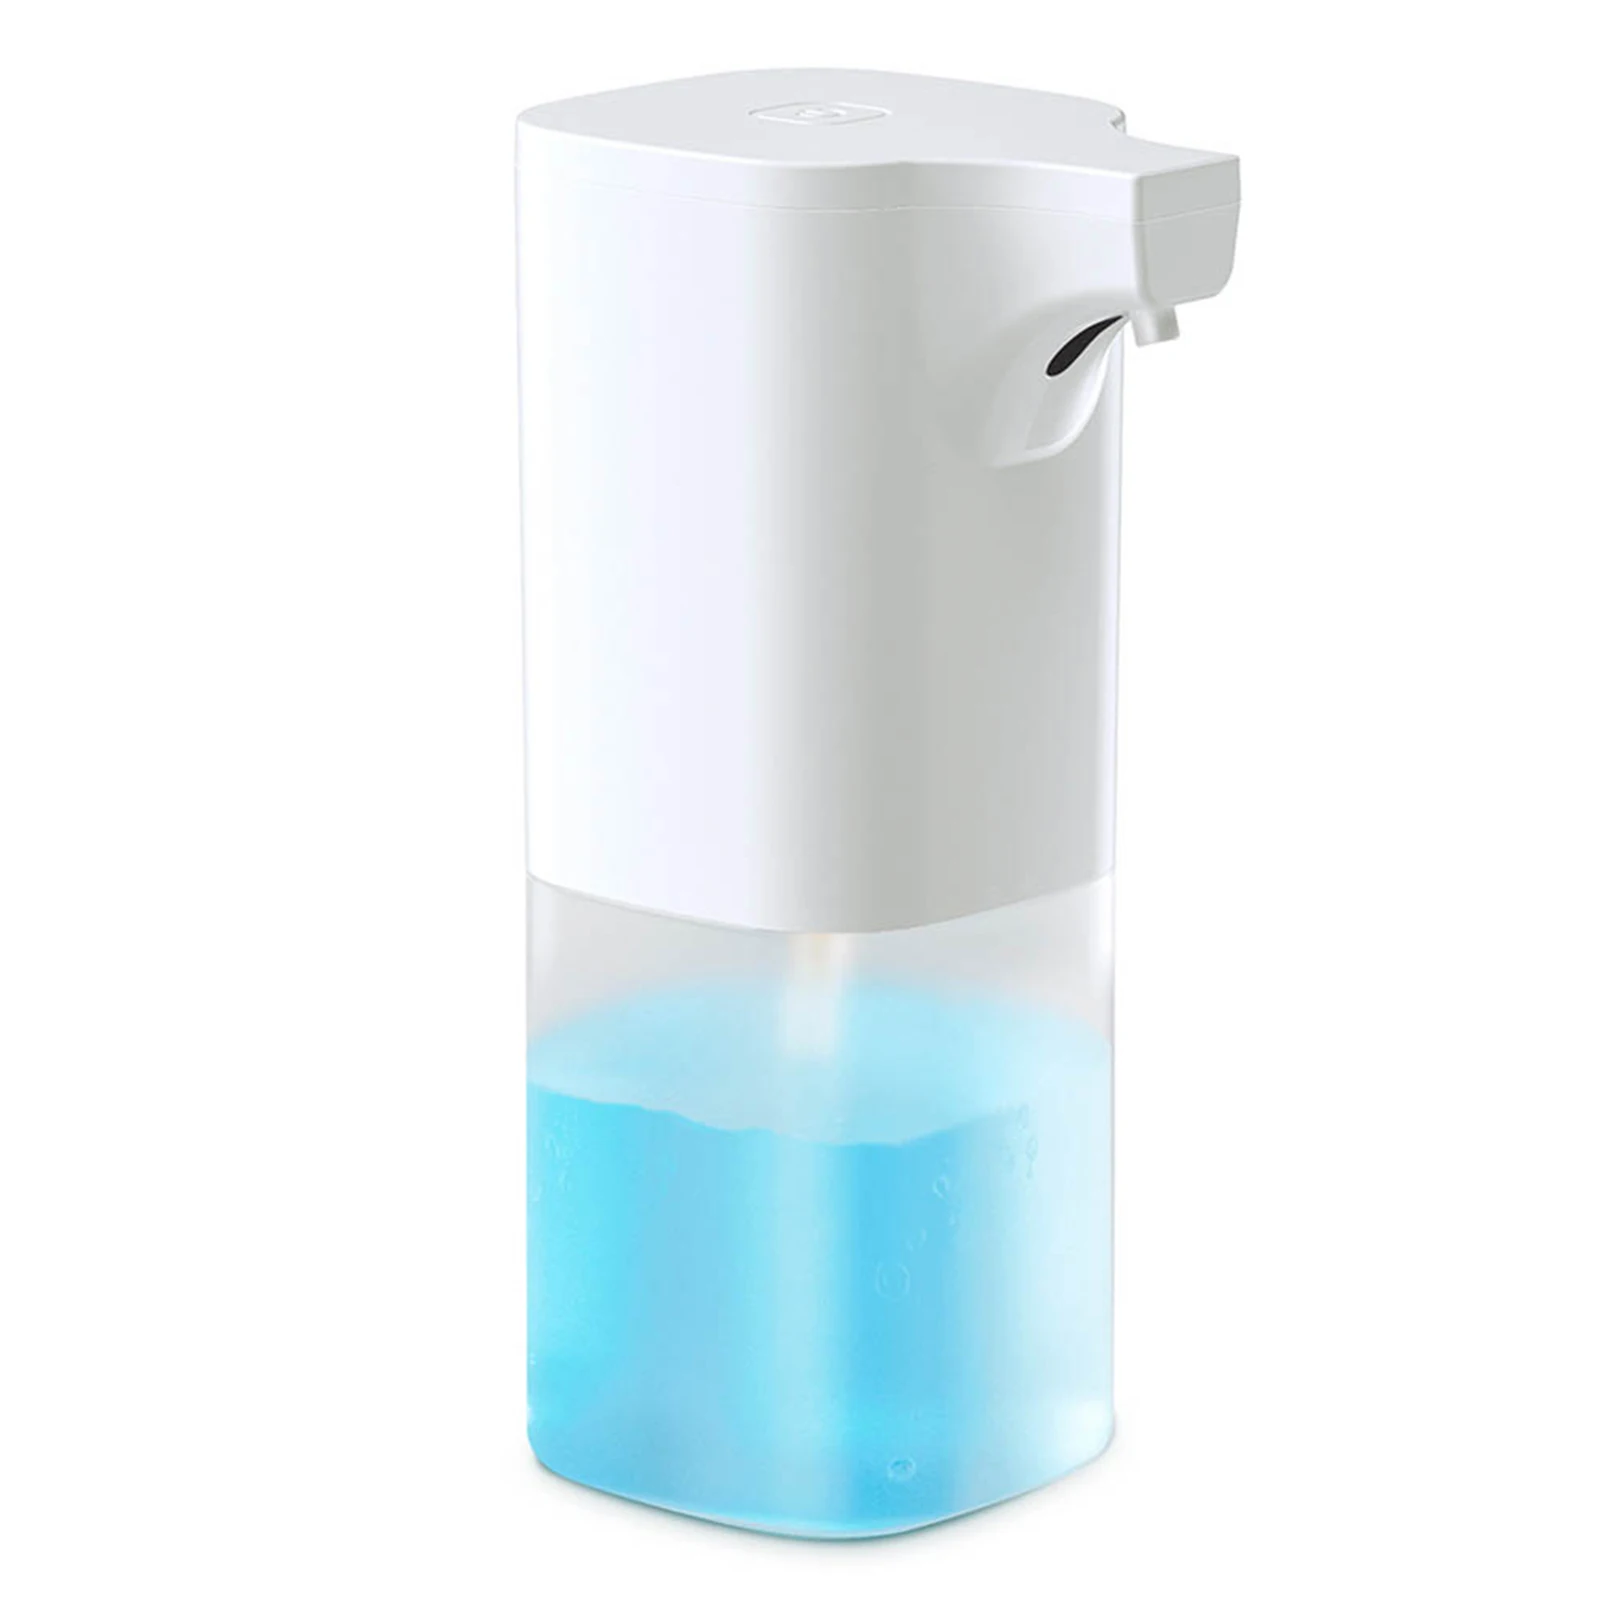 

Intelligent Induction Soap Dispensers Refillable Noncontact Automatic Dispensers for Gel Liquid Hand Sanitizer